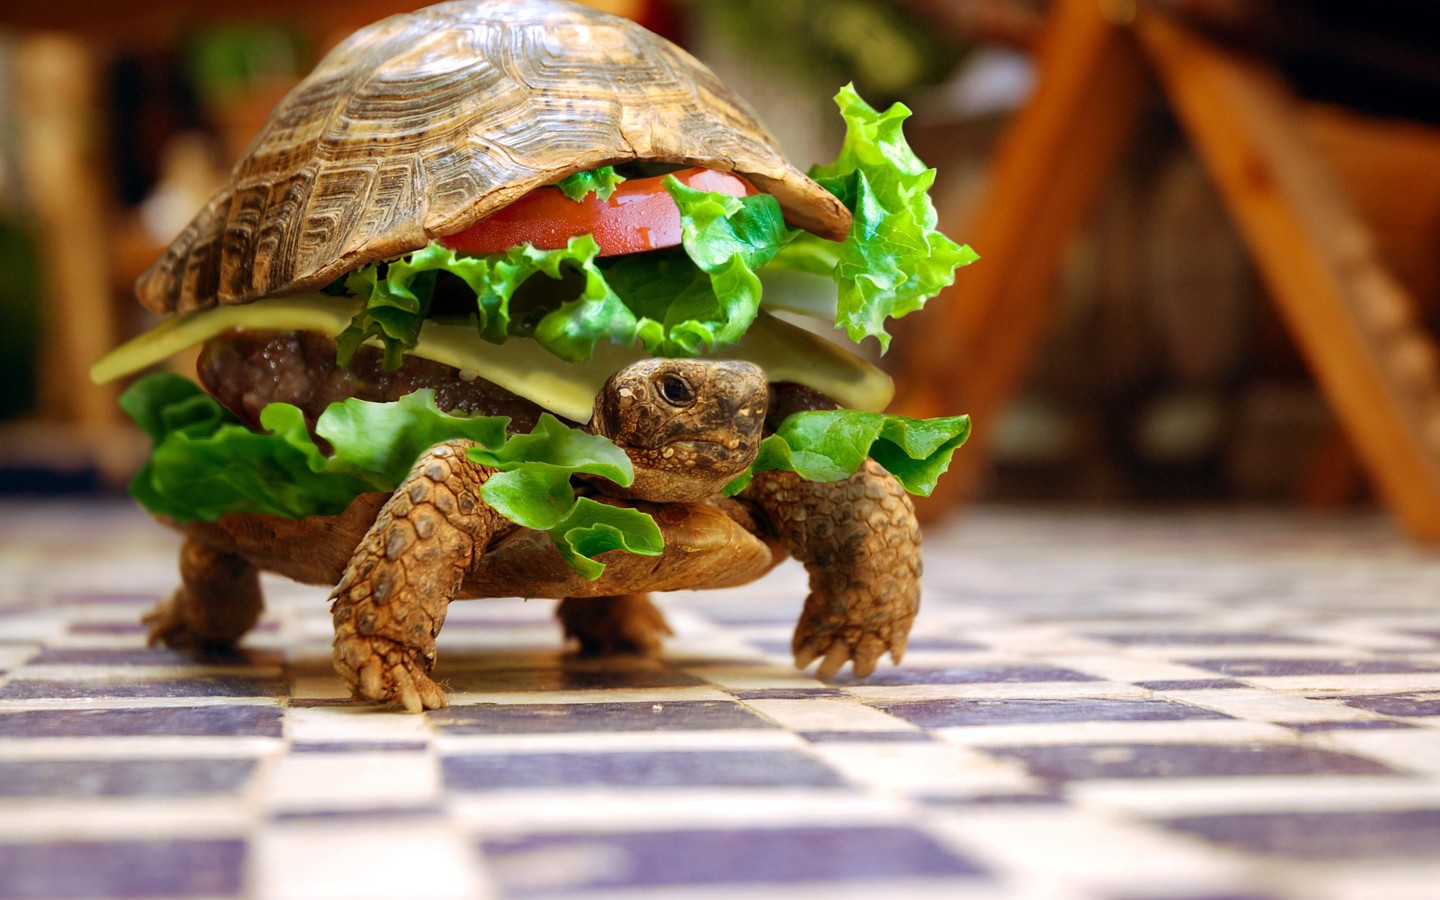 General 1440x900 turtle animals burgers sandwiches photo manipulation depth of field lettuce summer checkered photoshopped humor chess floor